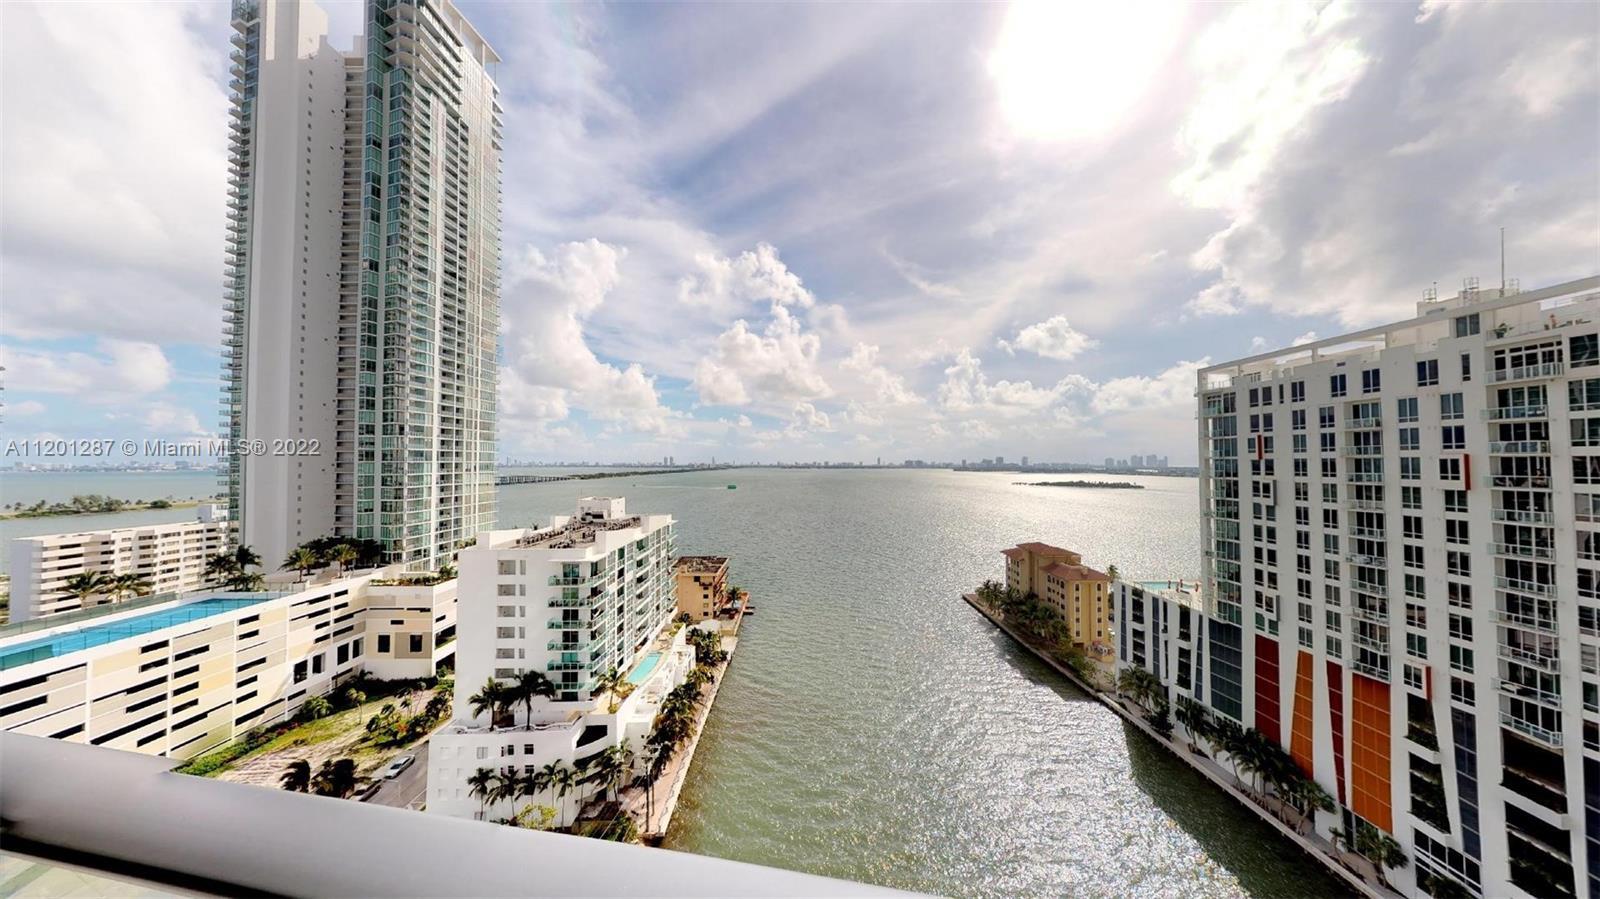 BEAUTIFUL AND SPACIOUS 1 BEDROOM/1.5 BATH APARTMENT IN THE LUXURY INCON BAY CONDO IN EDGE WATER. AMA